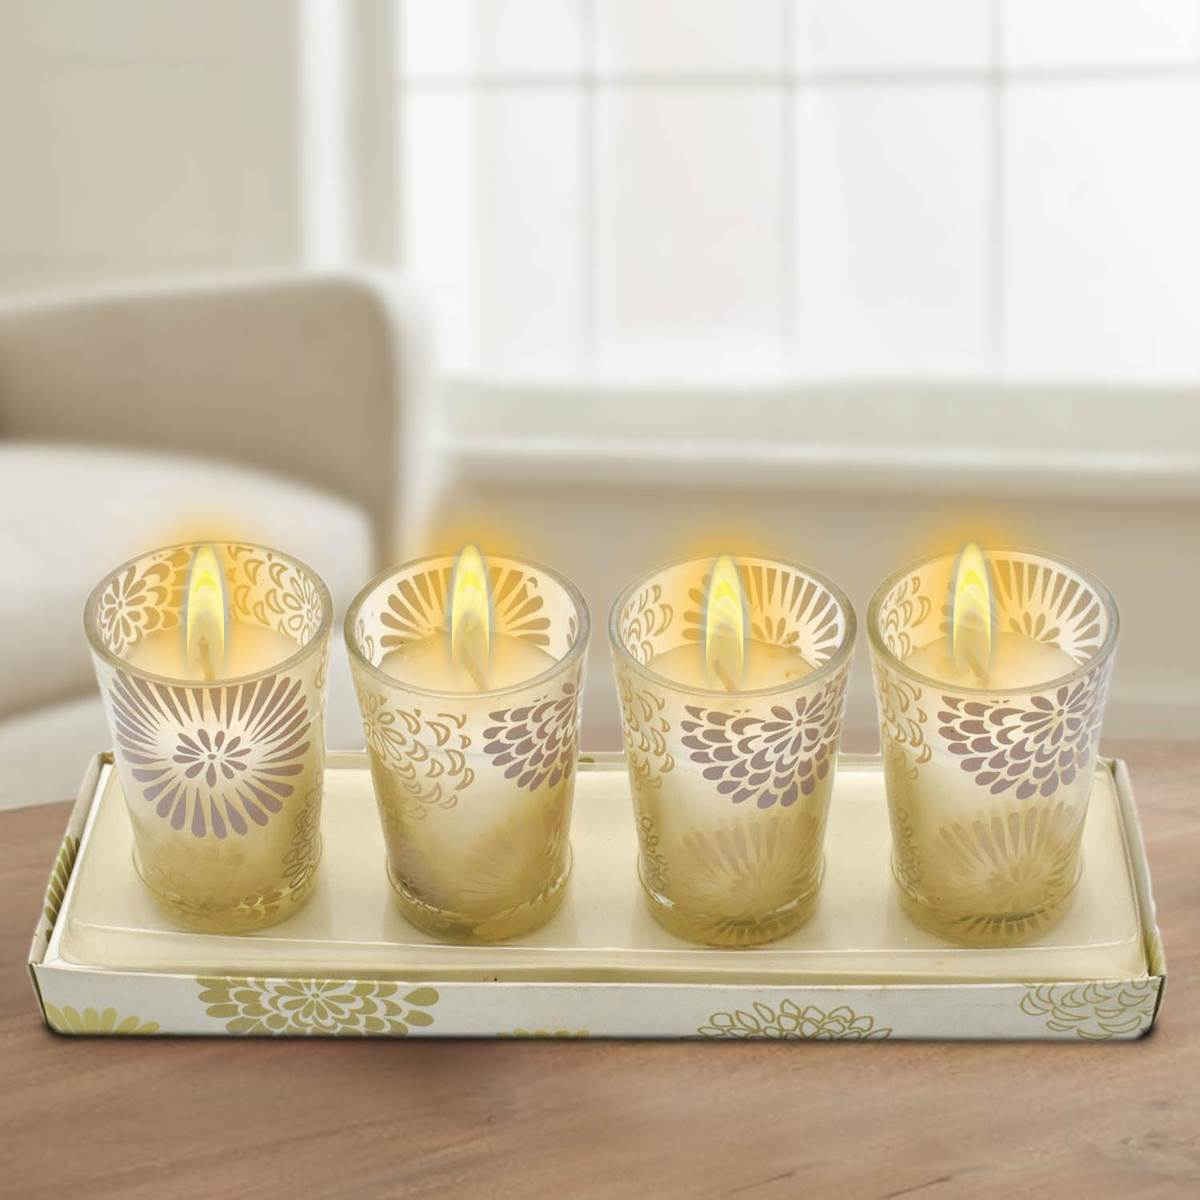 Wax Candle in Glass Jar Set of 4 f (904095)